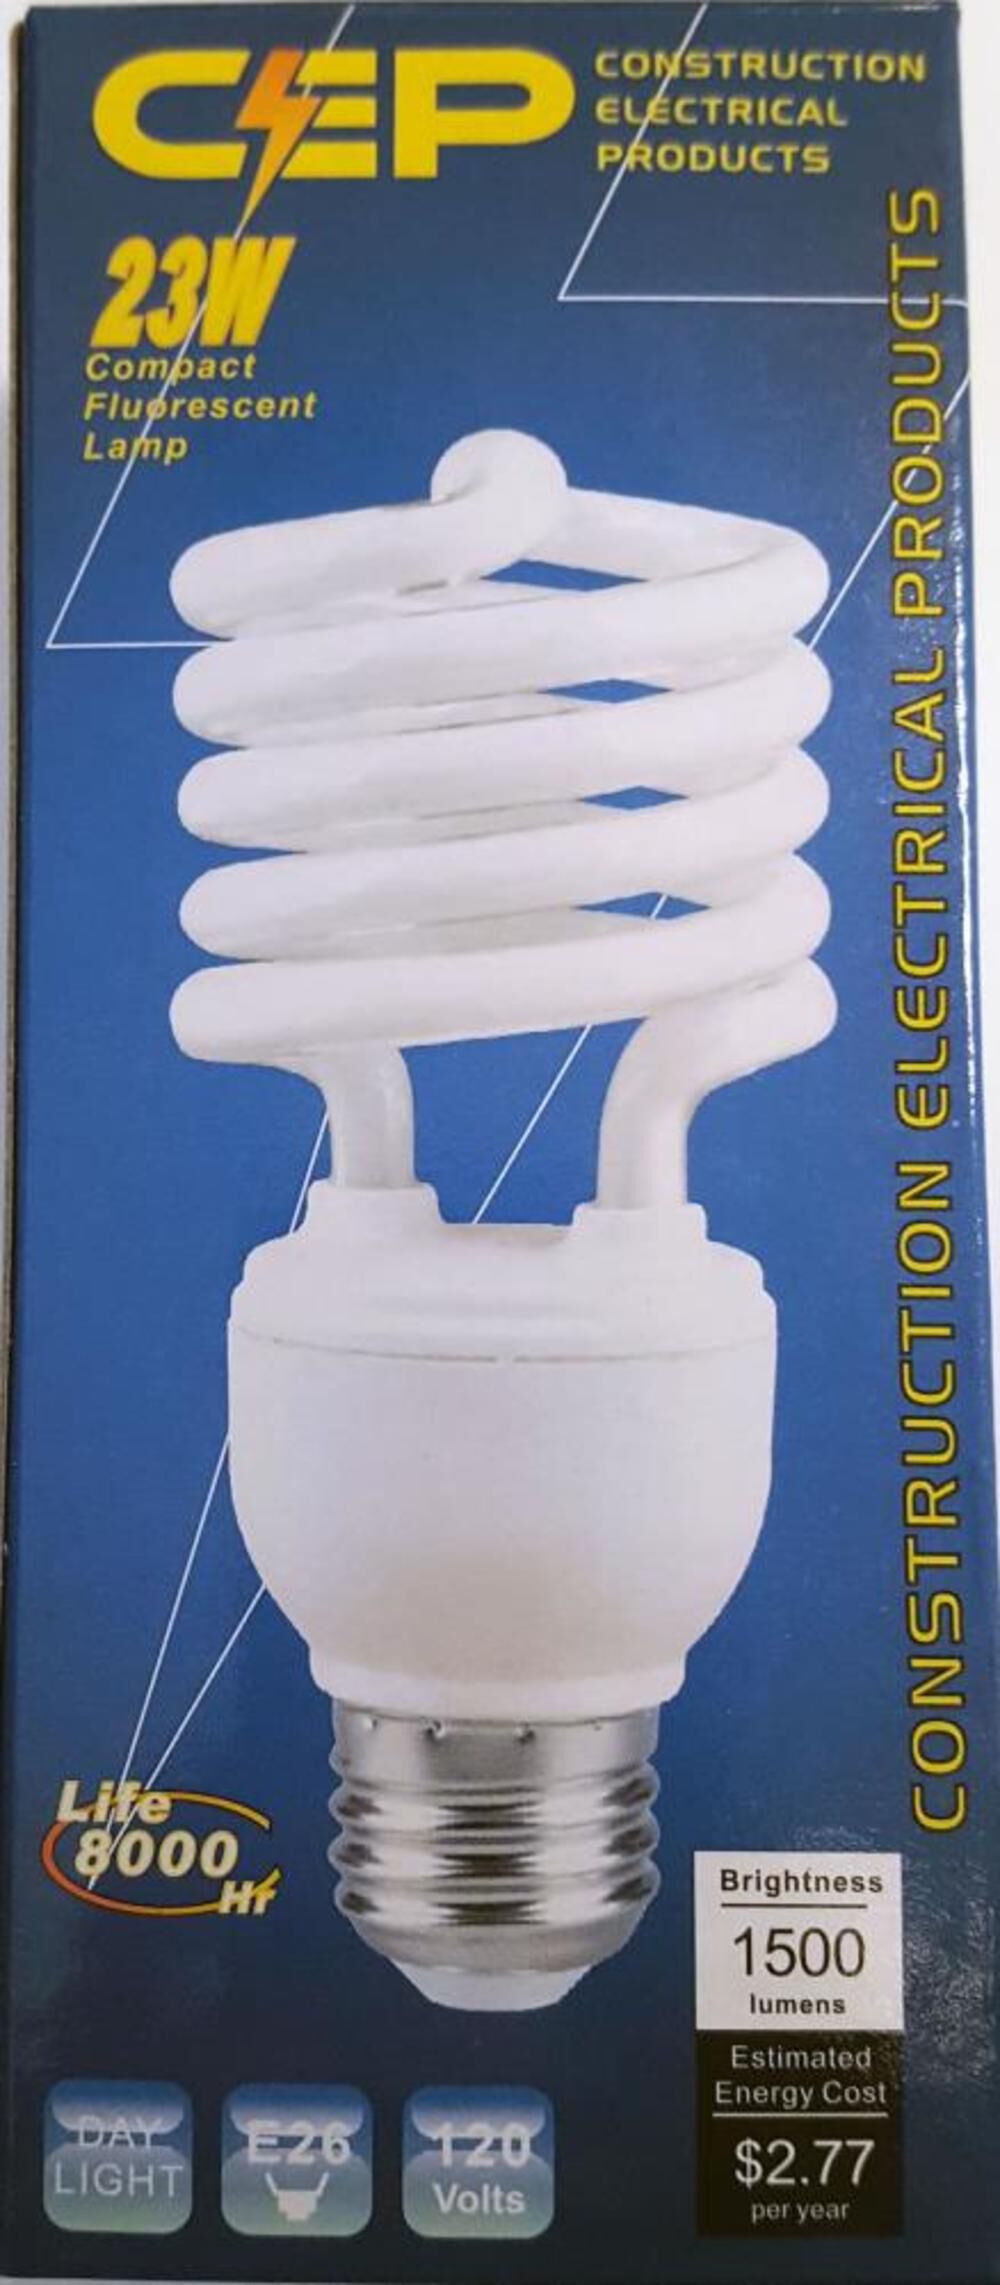 Electrical Products 10W 800 Lumen E26 Impact Resistant Bulb 23WCFL